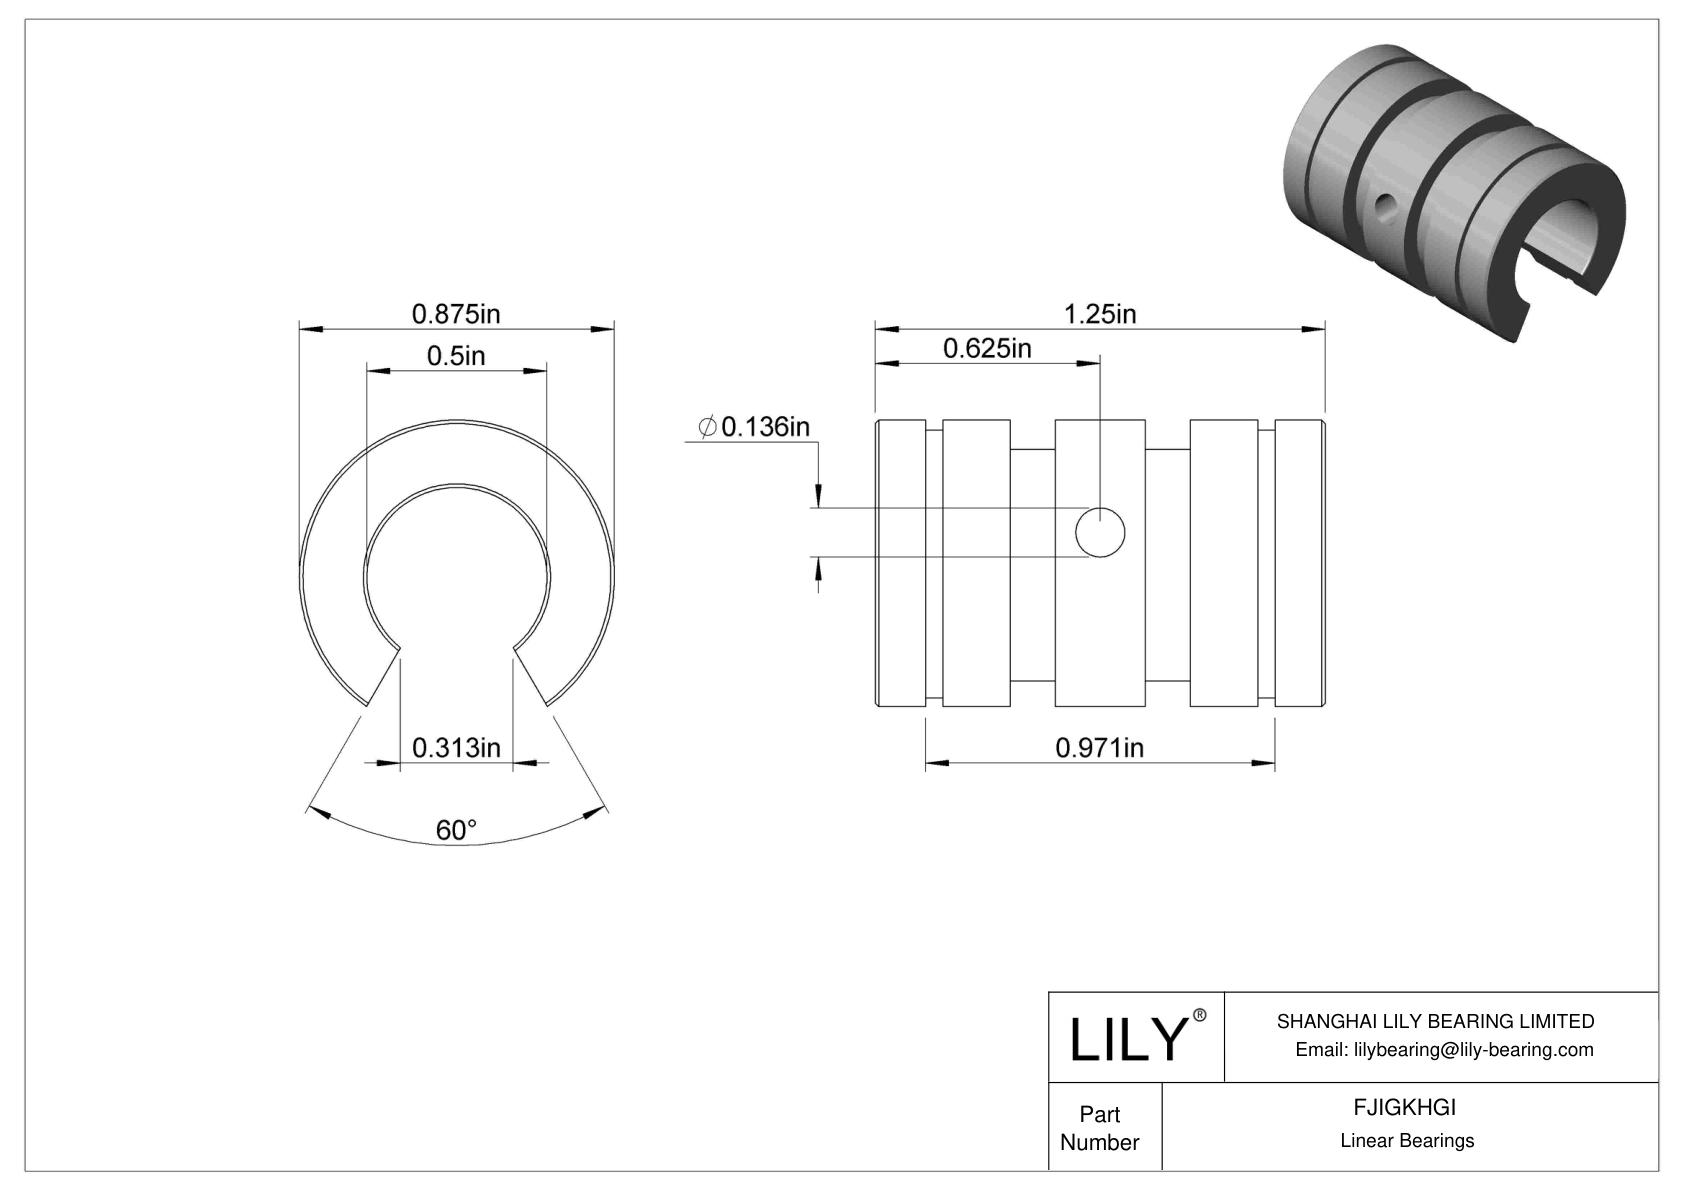 FJIGKHGI Common Linear Sleeve Bearings for Support Rail Shafts cad drawing